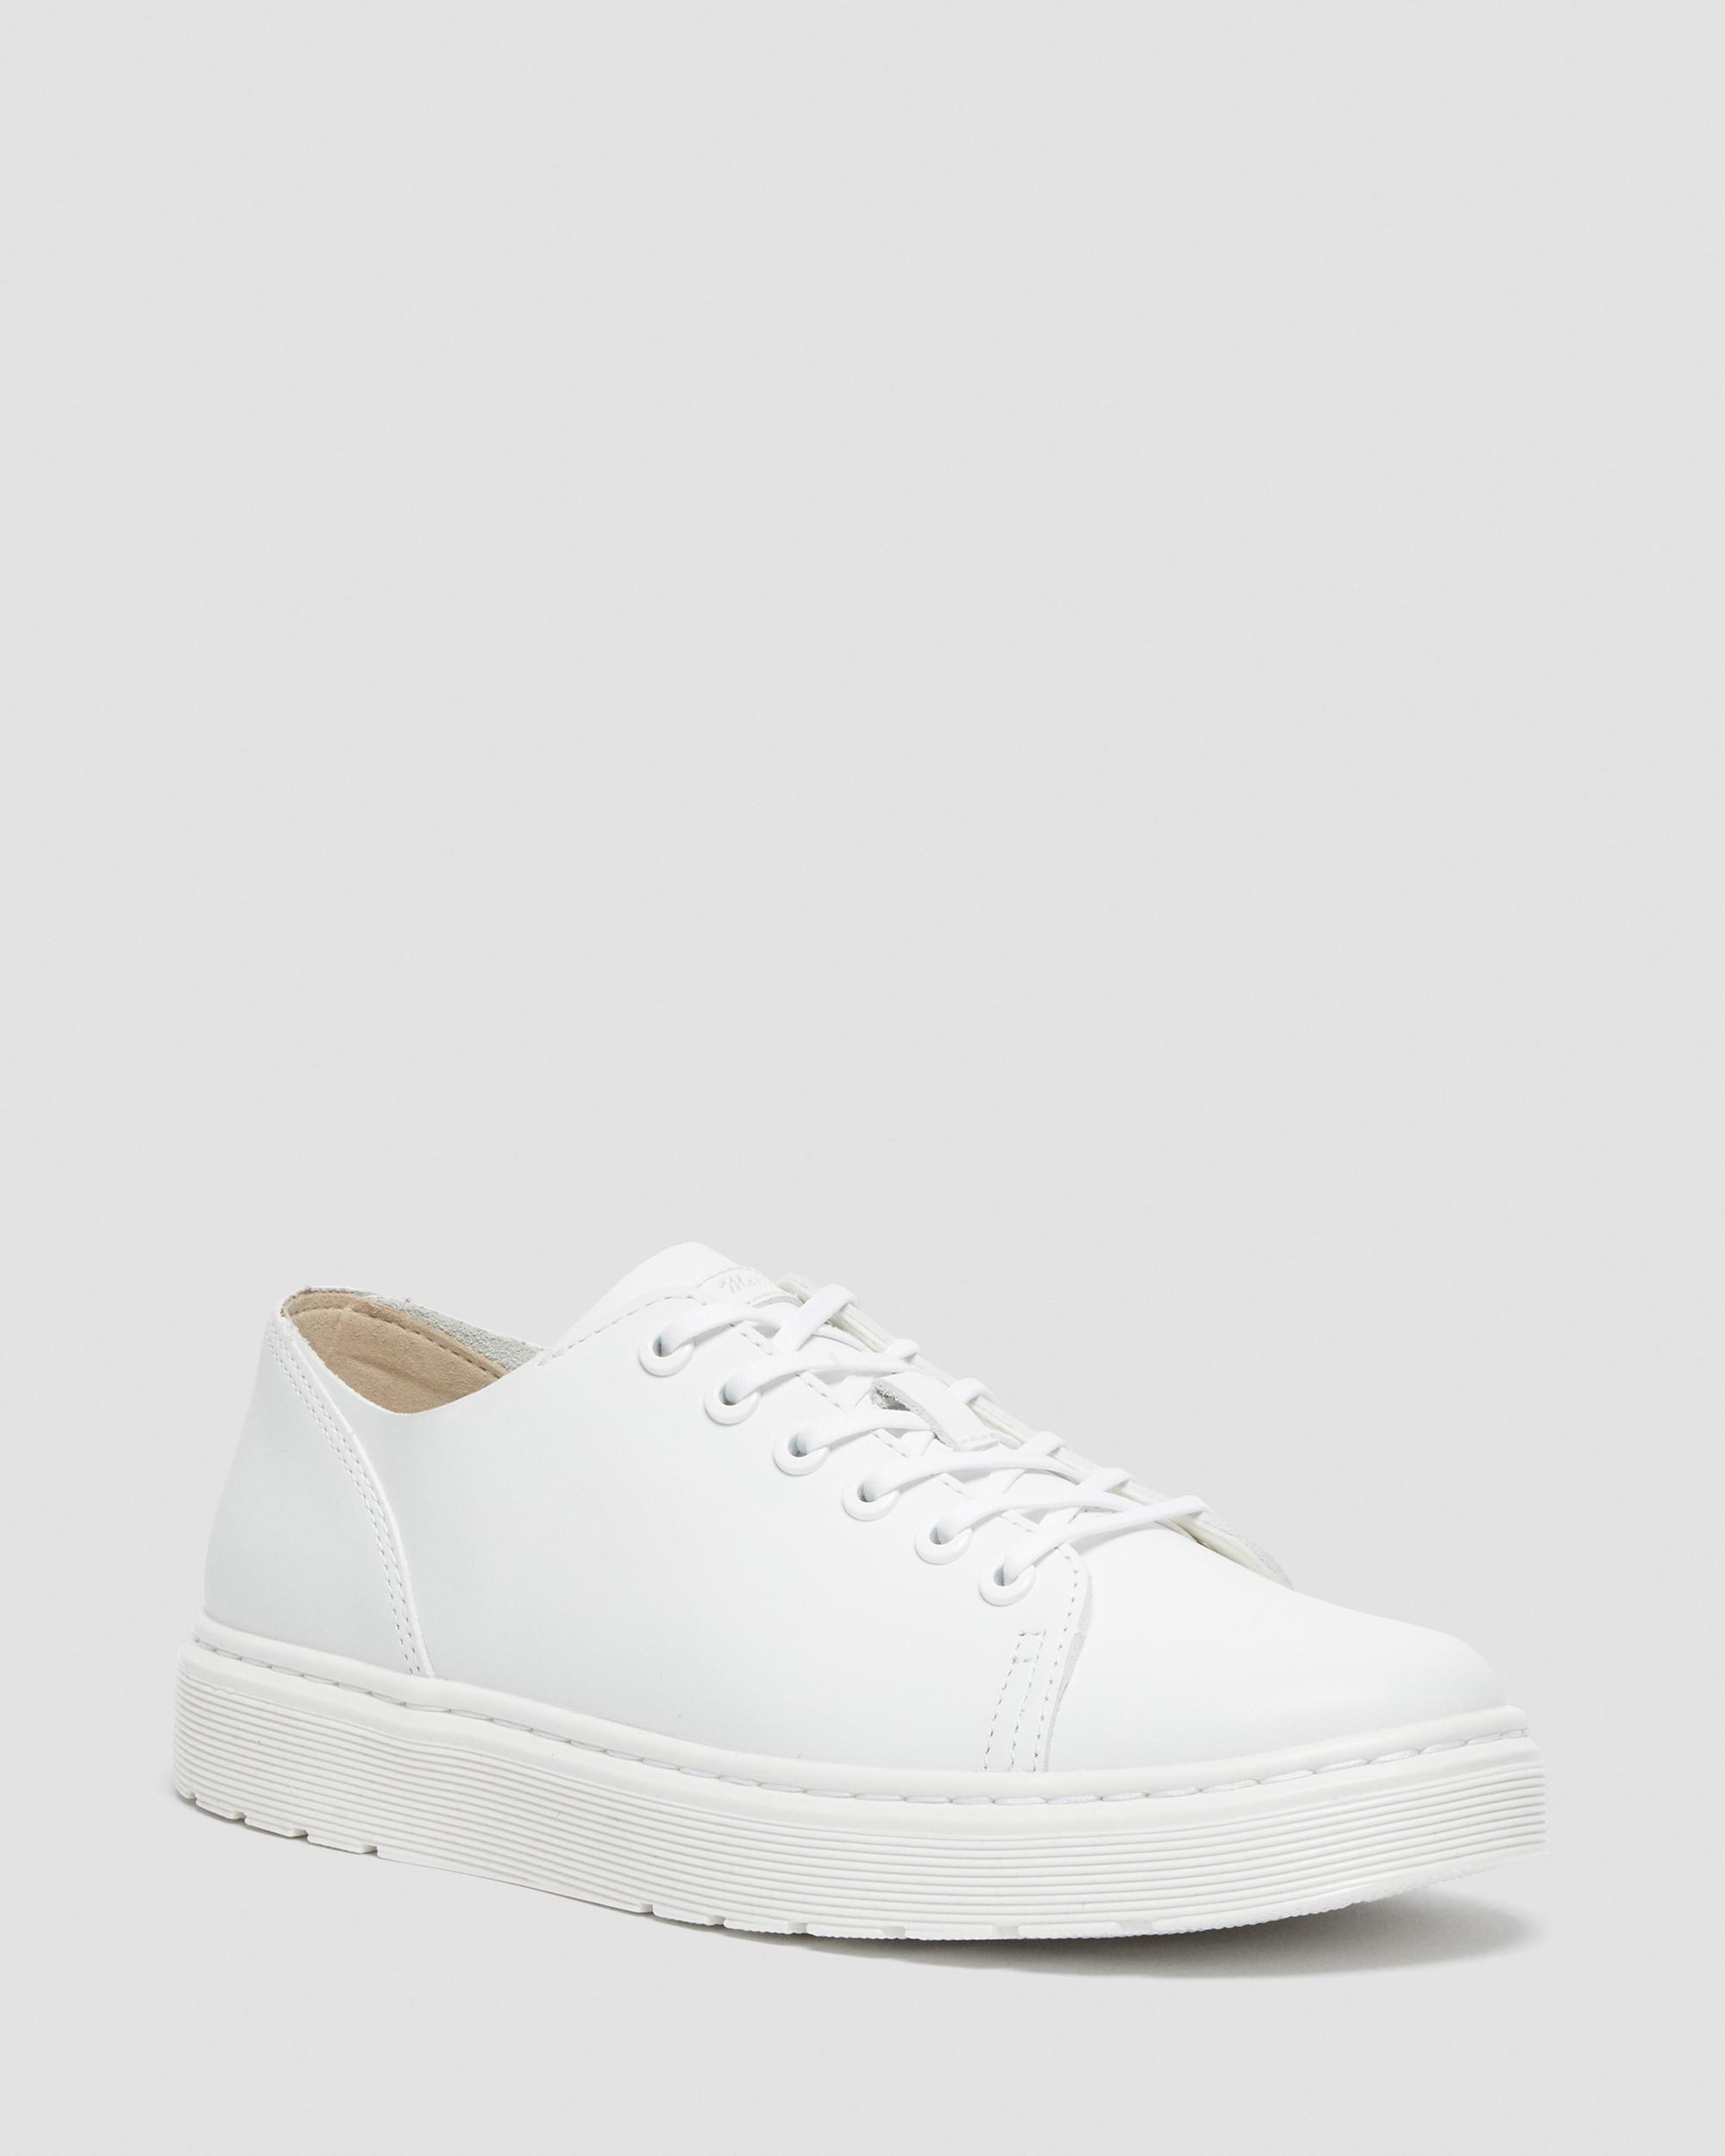 Dante Leather Casual Shoes in White